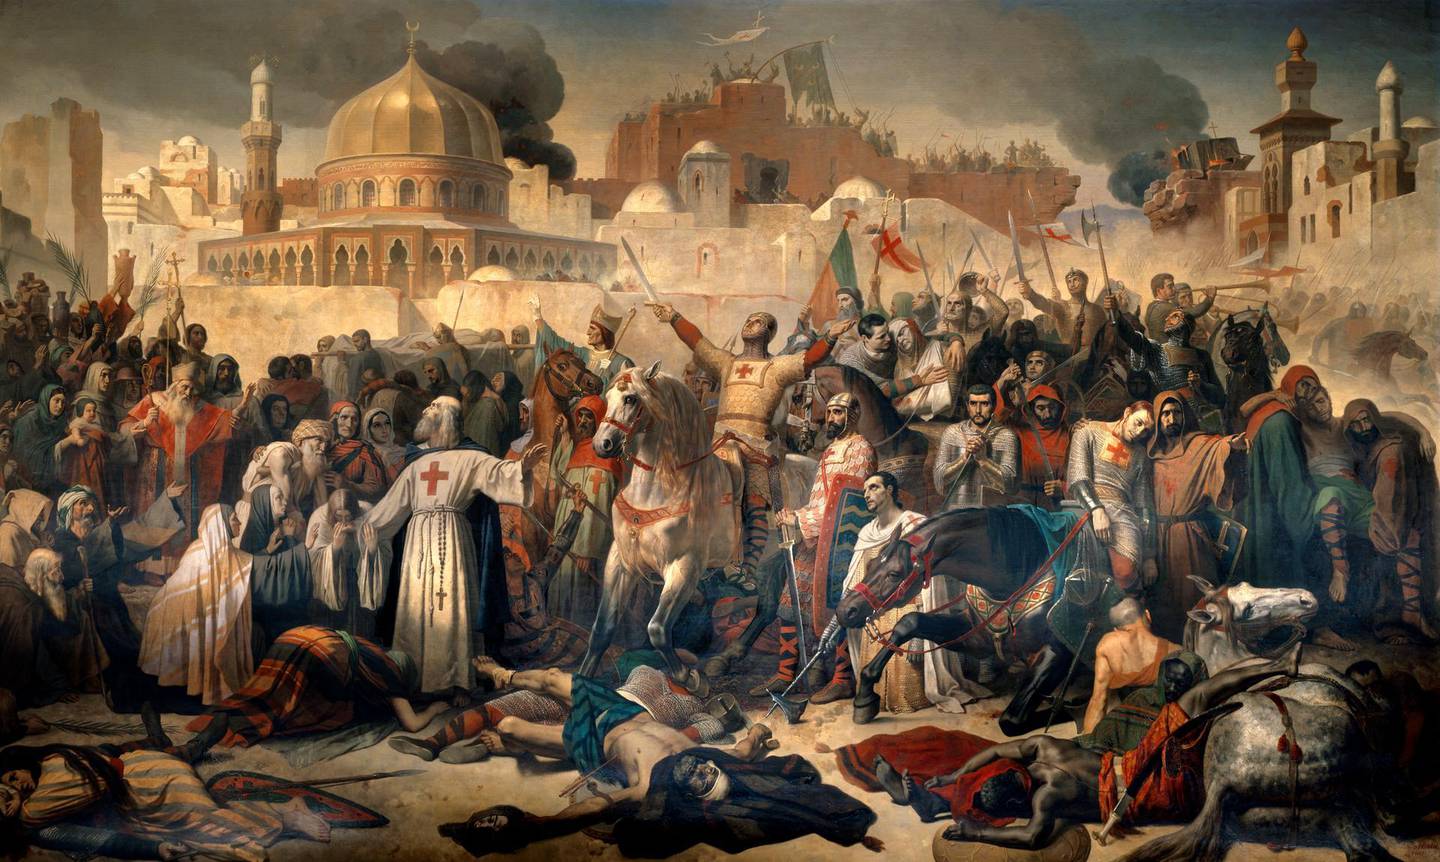 First Crusade: Taking of Jerusalem by the Crusaders, 15 July 1099. Godfrey of Bouillon ( or Godefroi - Godefroy de Bouillon) giving thanks to God in the presence of Peter the Hermit after the capture of the city. Painting by Emile Signol (1804-1892), 1847. 3,24 x 5,57 m. Castle Museum, Versailles, France (Photo by Leemage/Corbis via Getty Images)